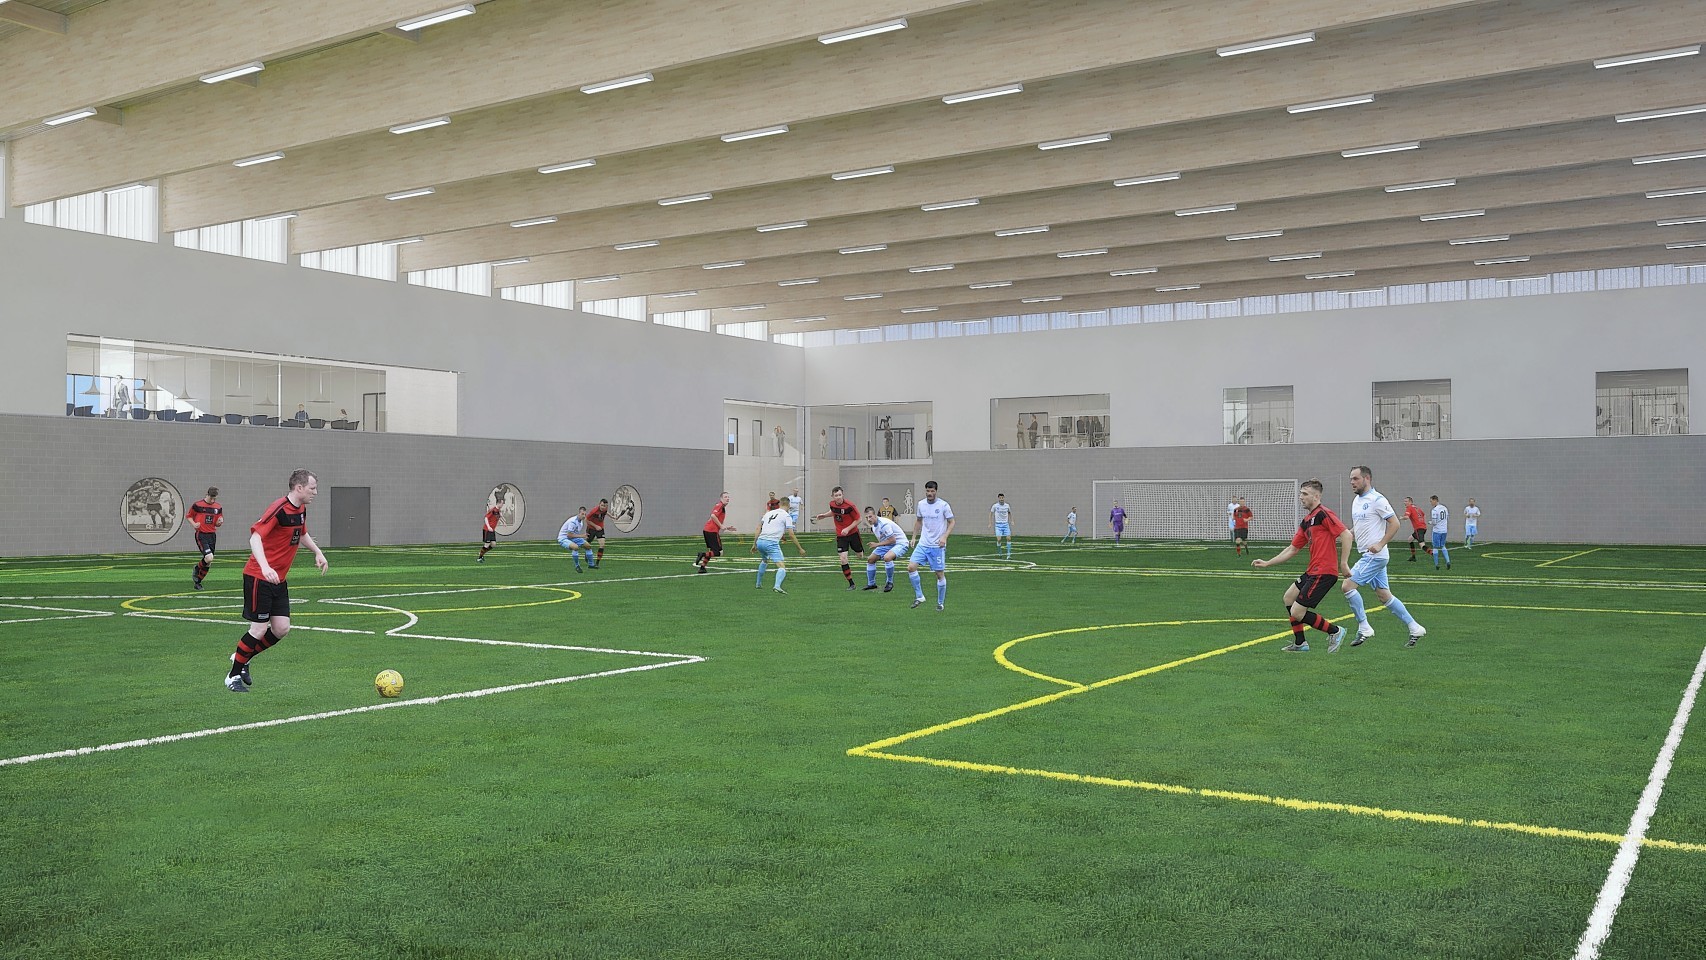 Some of the indoor pitches at the A look inside the Garioch Sports and Community Centre